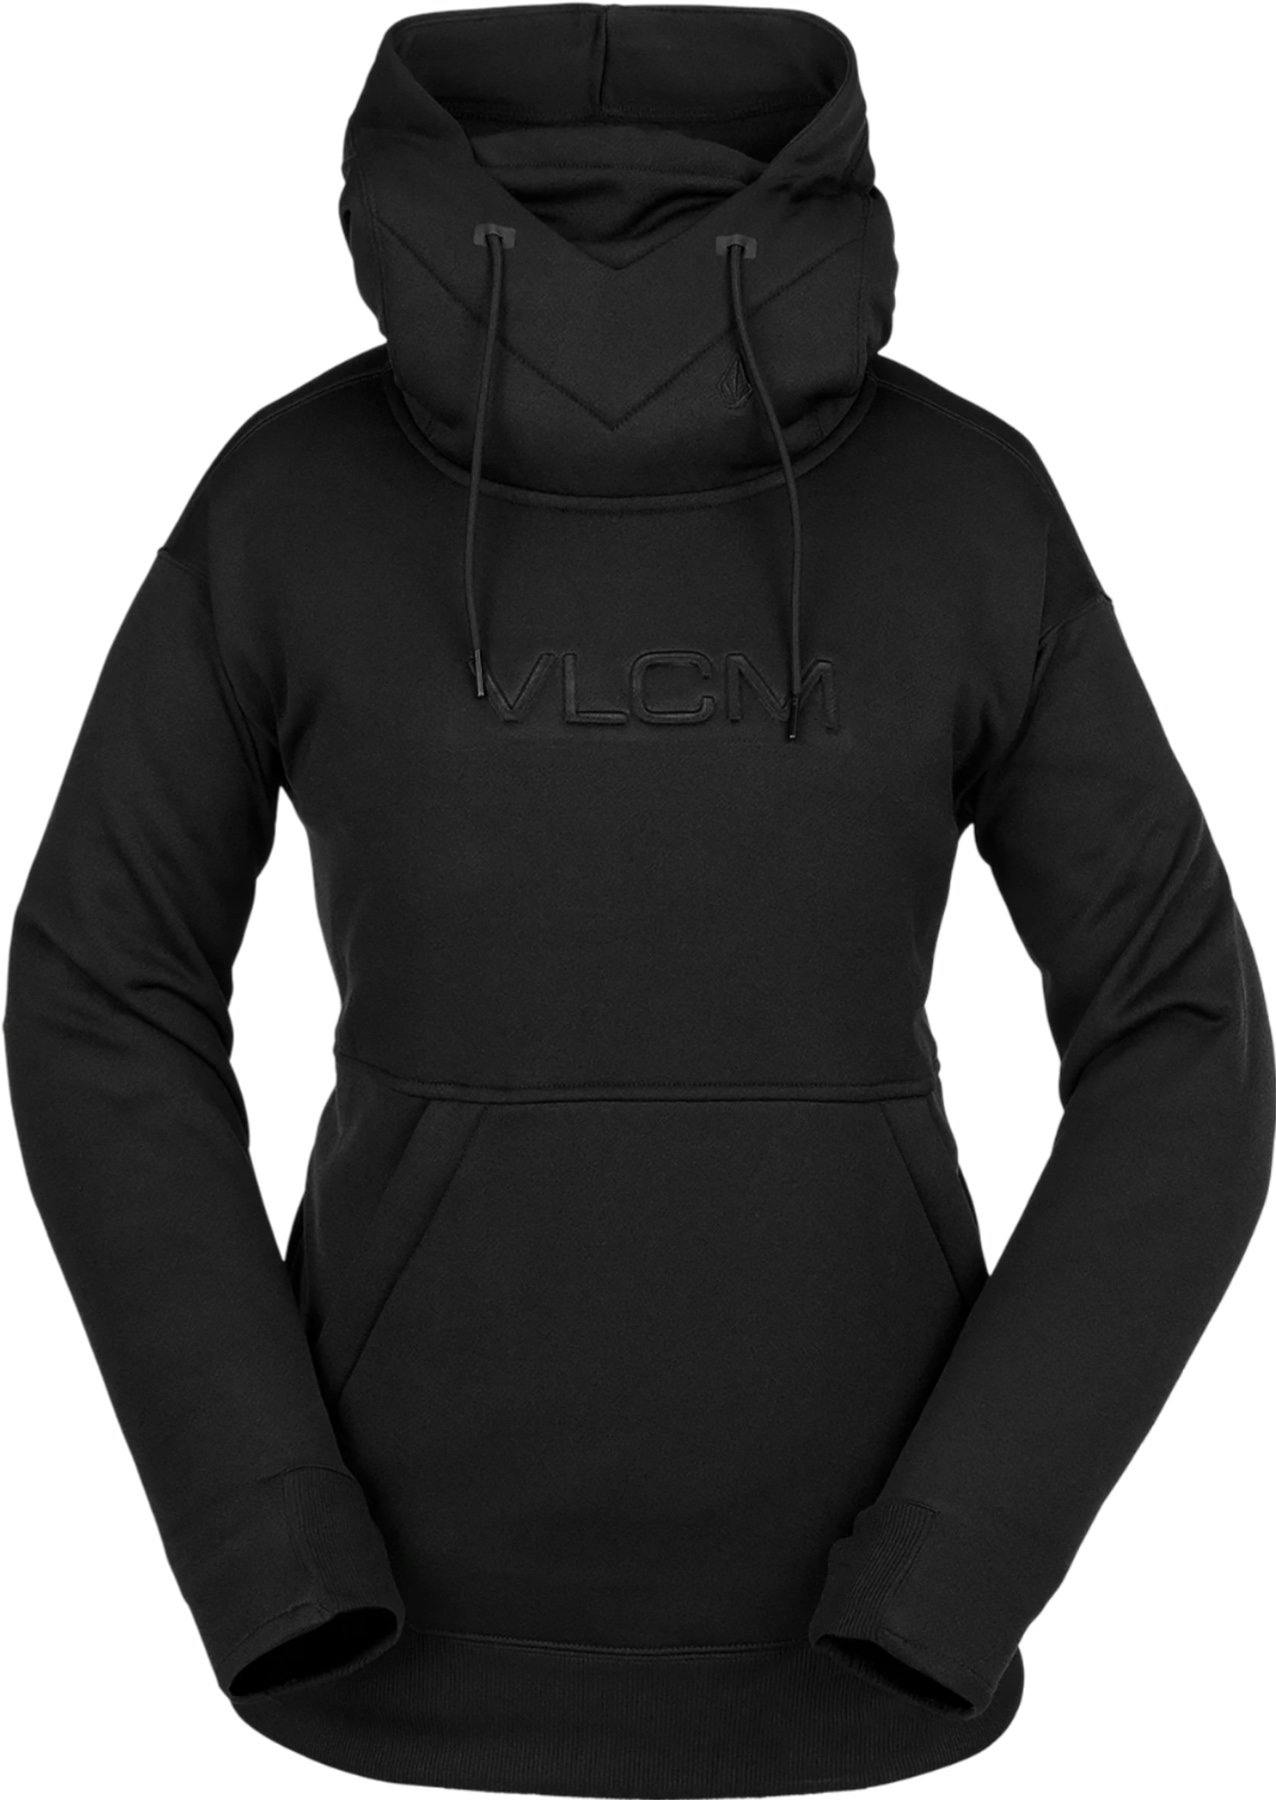 Product image for Riding Hydro Hoodie - Women's